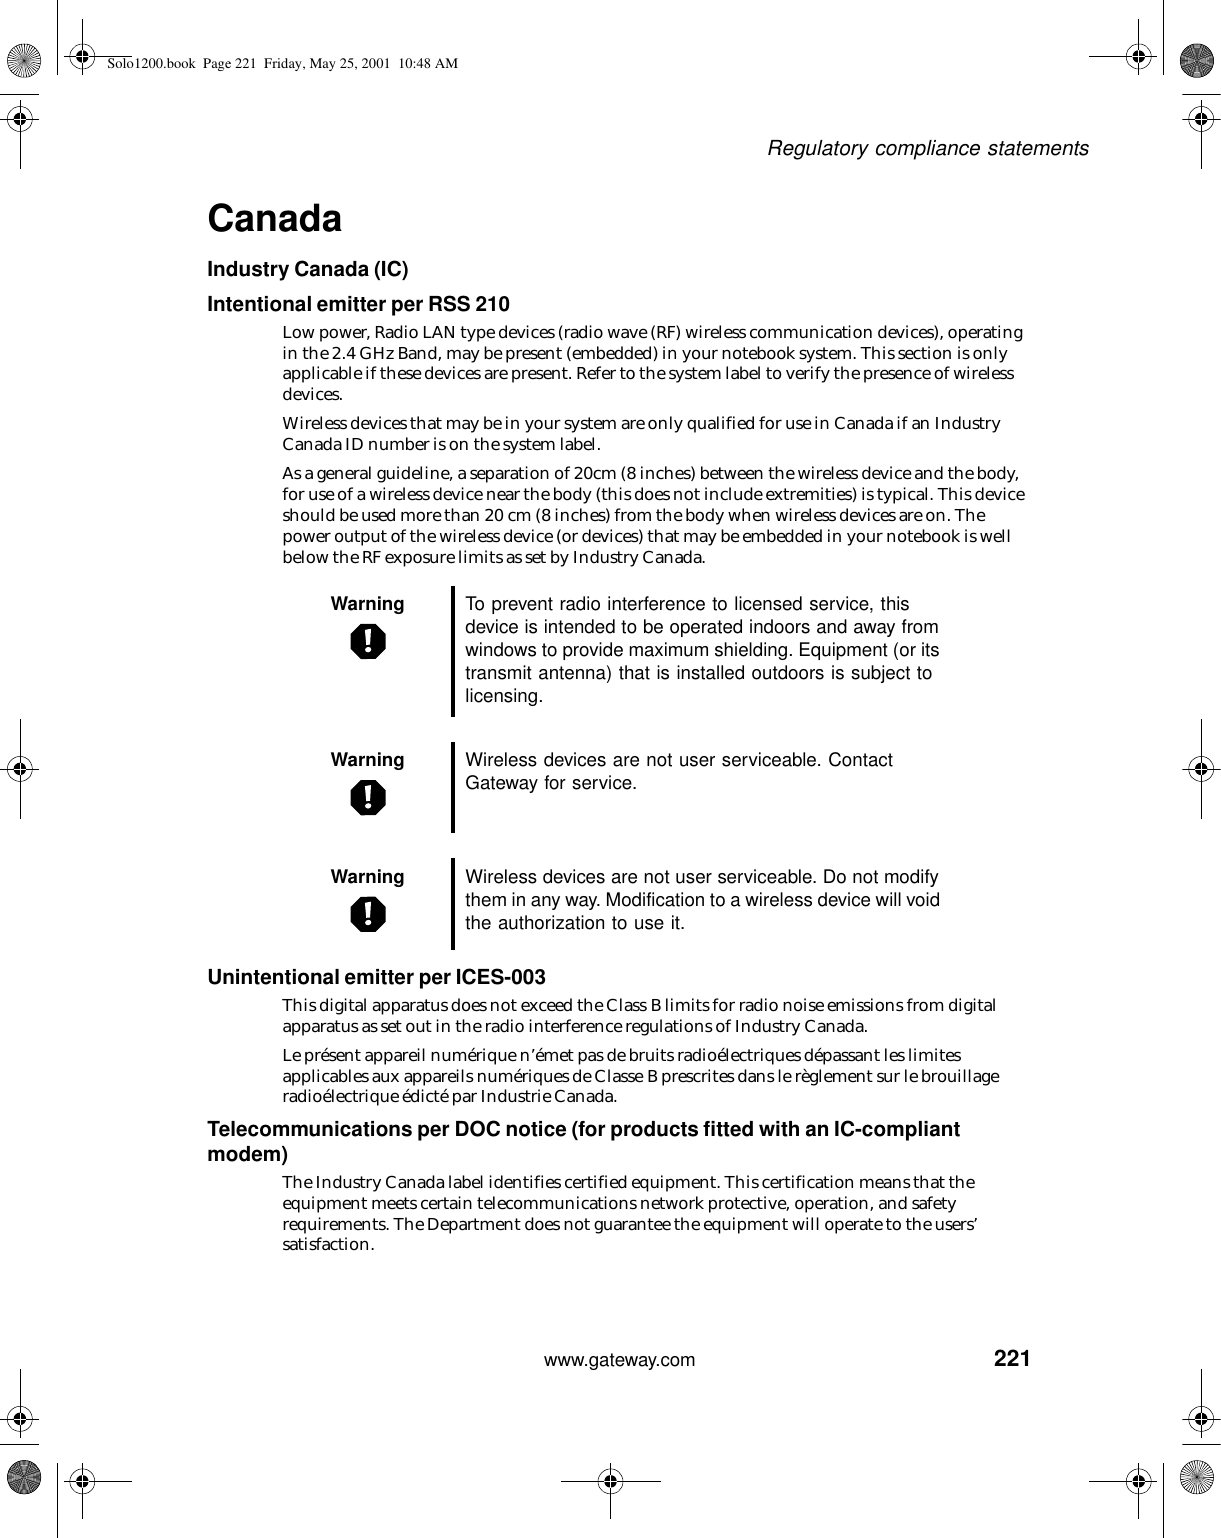 221Regulatory compliance statementswww.gateway.comCanadaIndustry Canada (IC)Intentional emitter per RSS 210Low power, Radio LAN type devices (radio wave (RF) wireless communication devices), operating in the 2.4 GHz Band, may be present (embedded) in your notebook system. This section is only applicable if these devices are present. Refer to the system label to verify the presence of wireless devices.Wireless devices that may be in your system are only qualified for use in Canada if an Industry Canada ID number is on the system label.As a general guideline, a separation of 20cm (8 inches) between the wireless device and the body, for use of a wireless device near the body (this does not include extremities) is typical. This device should be used more than 20 cm (8 inches) from the body when wireless devices are on. The power output of the wireless device (or devices) that may be embedded in your notebook is well below the RF exposure limits as set by Industry Canada.Unintentional emitter per ICES-003This digital apparatus does not exceed the Class B limits for radio noise emissions from digital apparatus as set out in the radio interference regulations of Industry Canada.Le présent appareil numérique n’émet pas de bruits radioélectriques dépassant les limites applicables aux appareils numériques de Classe B prescrites dans le règlement sur le brouillage radioélectrique édicté par Industrie Canada.Telecommunications per DOC notice (for products fitted with an IC-compliant modem)The Industry Canada label identifies certified equipment. This certification means that the equipment meets certain telecommunications network protective, operation, and safety requirements. The Department does not guarantee the equipment will operate to the users’ satisfaction.Warning To prevent radio interference to licensed service, this device is intended to be operated indoors and away from windows to provide maximum shielding. Equipment (or its transmit antenna) that is installed outdoors is subject to licensing.Warning Wireless devices are not user serviceable. Contact Gateway for service.Warning Wireless devices are not user serviceable. Do not modify them in any way. Modification to a wireless device will void the authorization to use it.Solo1200.book Page 221 Friday, May 25, 2001 10:48 AM